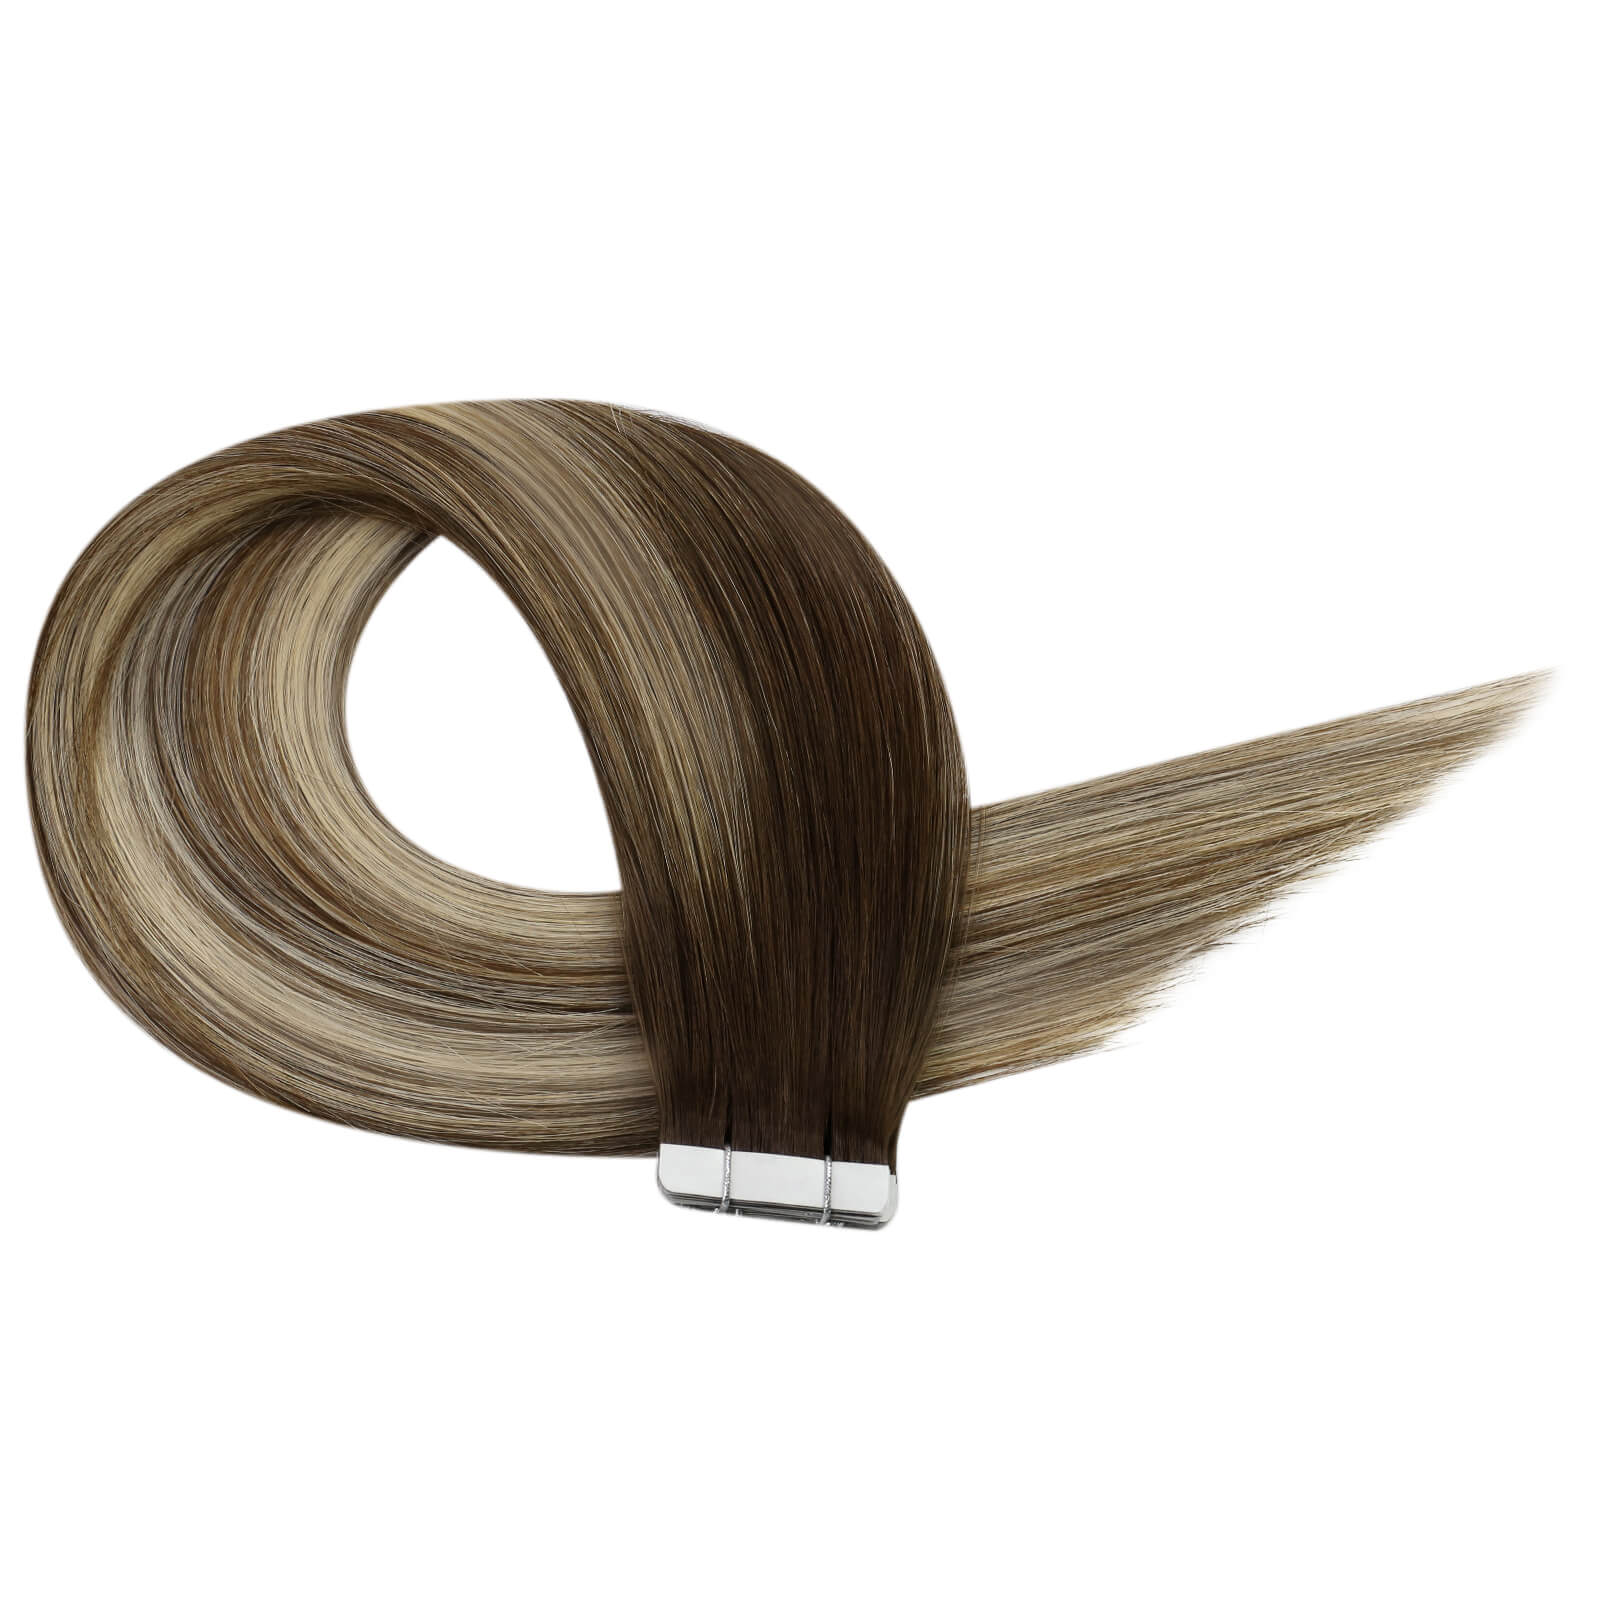 sunny hair in tape extensions, blonde tape in extensions, best quality virgin tape in hair extensions, high quality, natural tape ins, balayage brown virgin tape ins, highest quality human hair, real hair extensions tape in